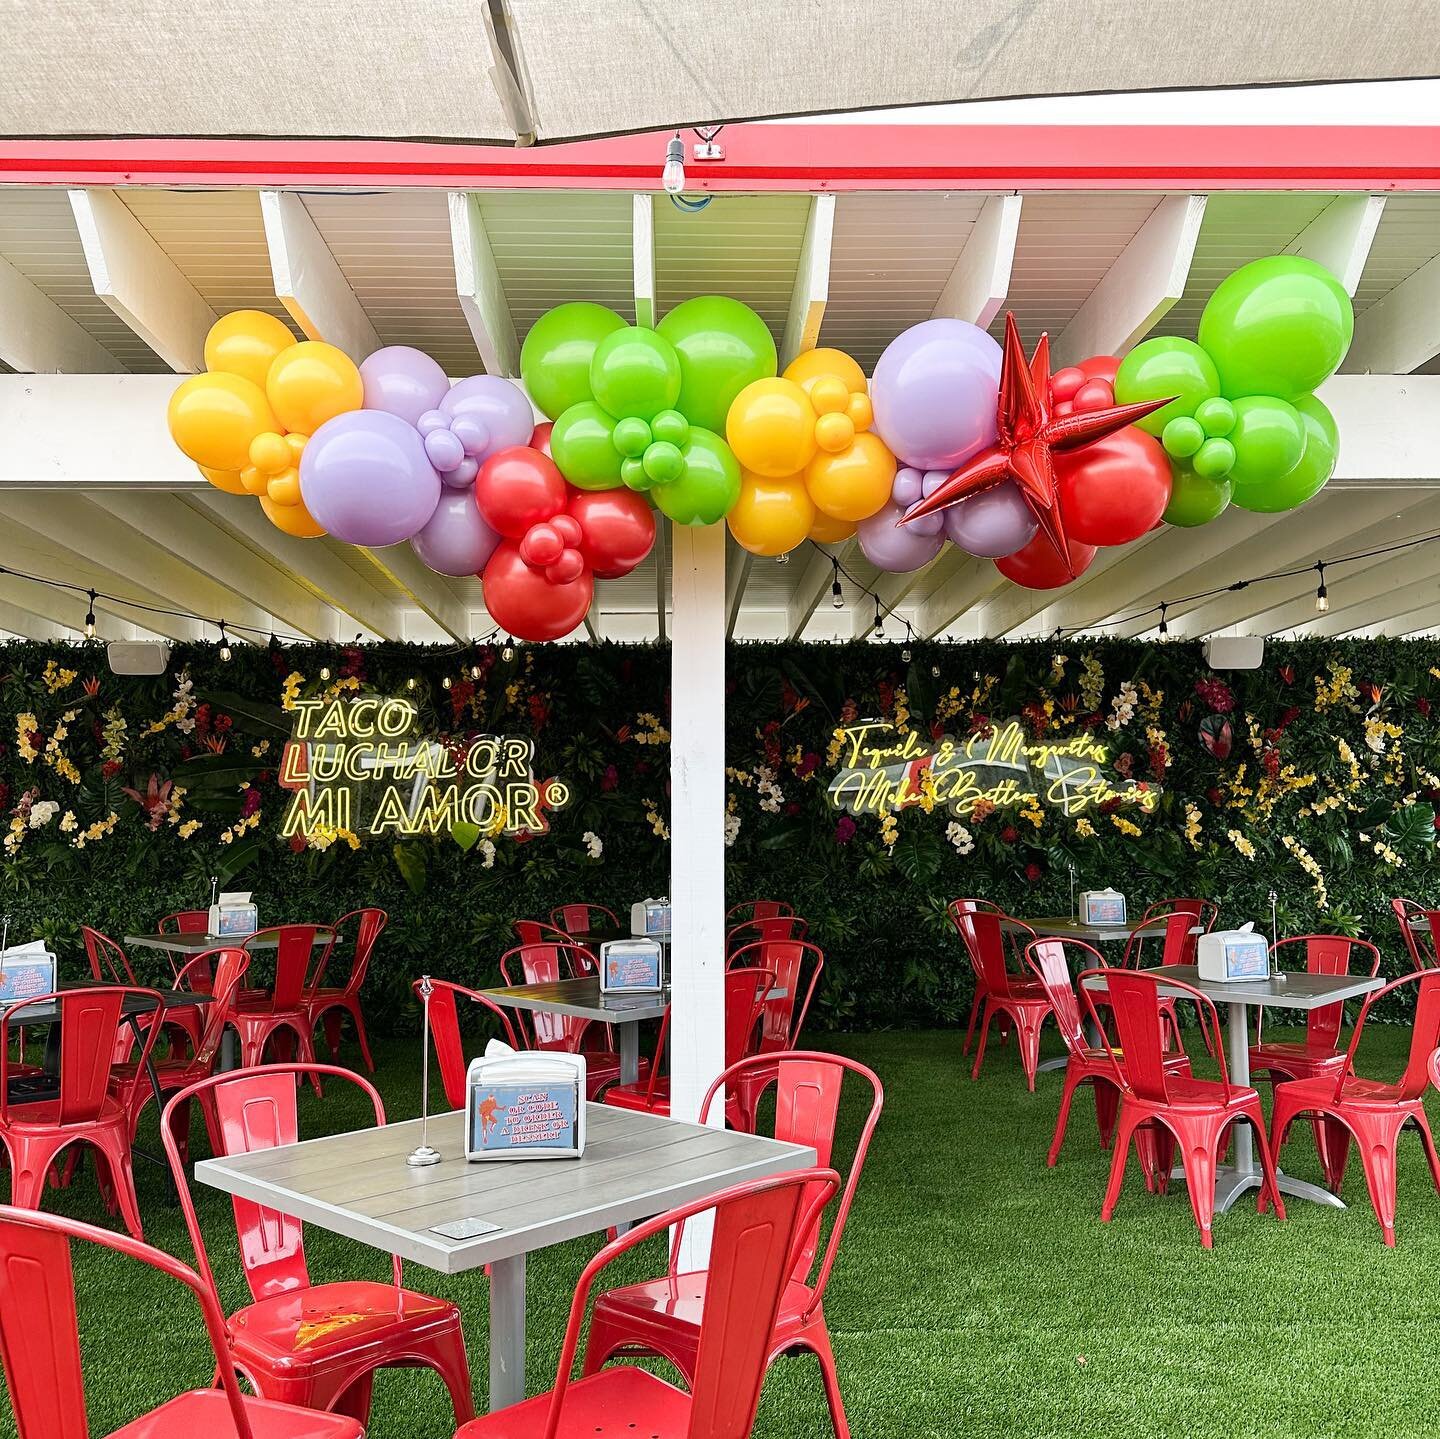 It&rsquo;s Grand Opening Day @taco_luchador &rsquo;s new location in J-TOWN and the new spot is gorgeous as ever!! Glad we could add a little POP of color! 🪅🌮🎈

#inflatelouisville#louisvilleballoons#louisvilleballoondecor#grandopeningballoons#loui